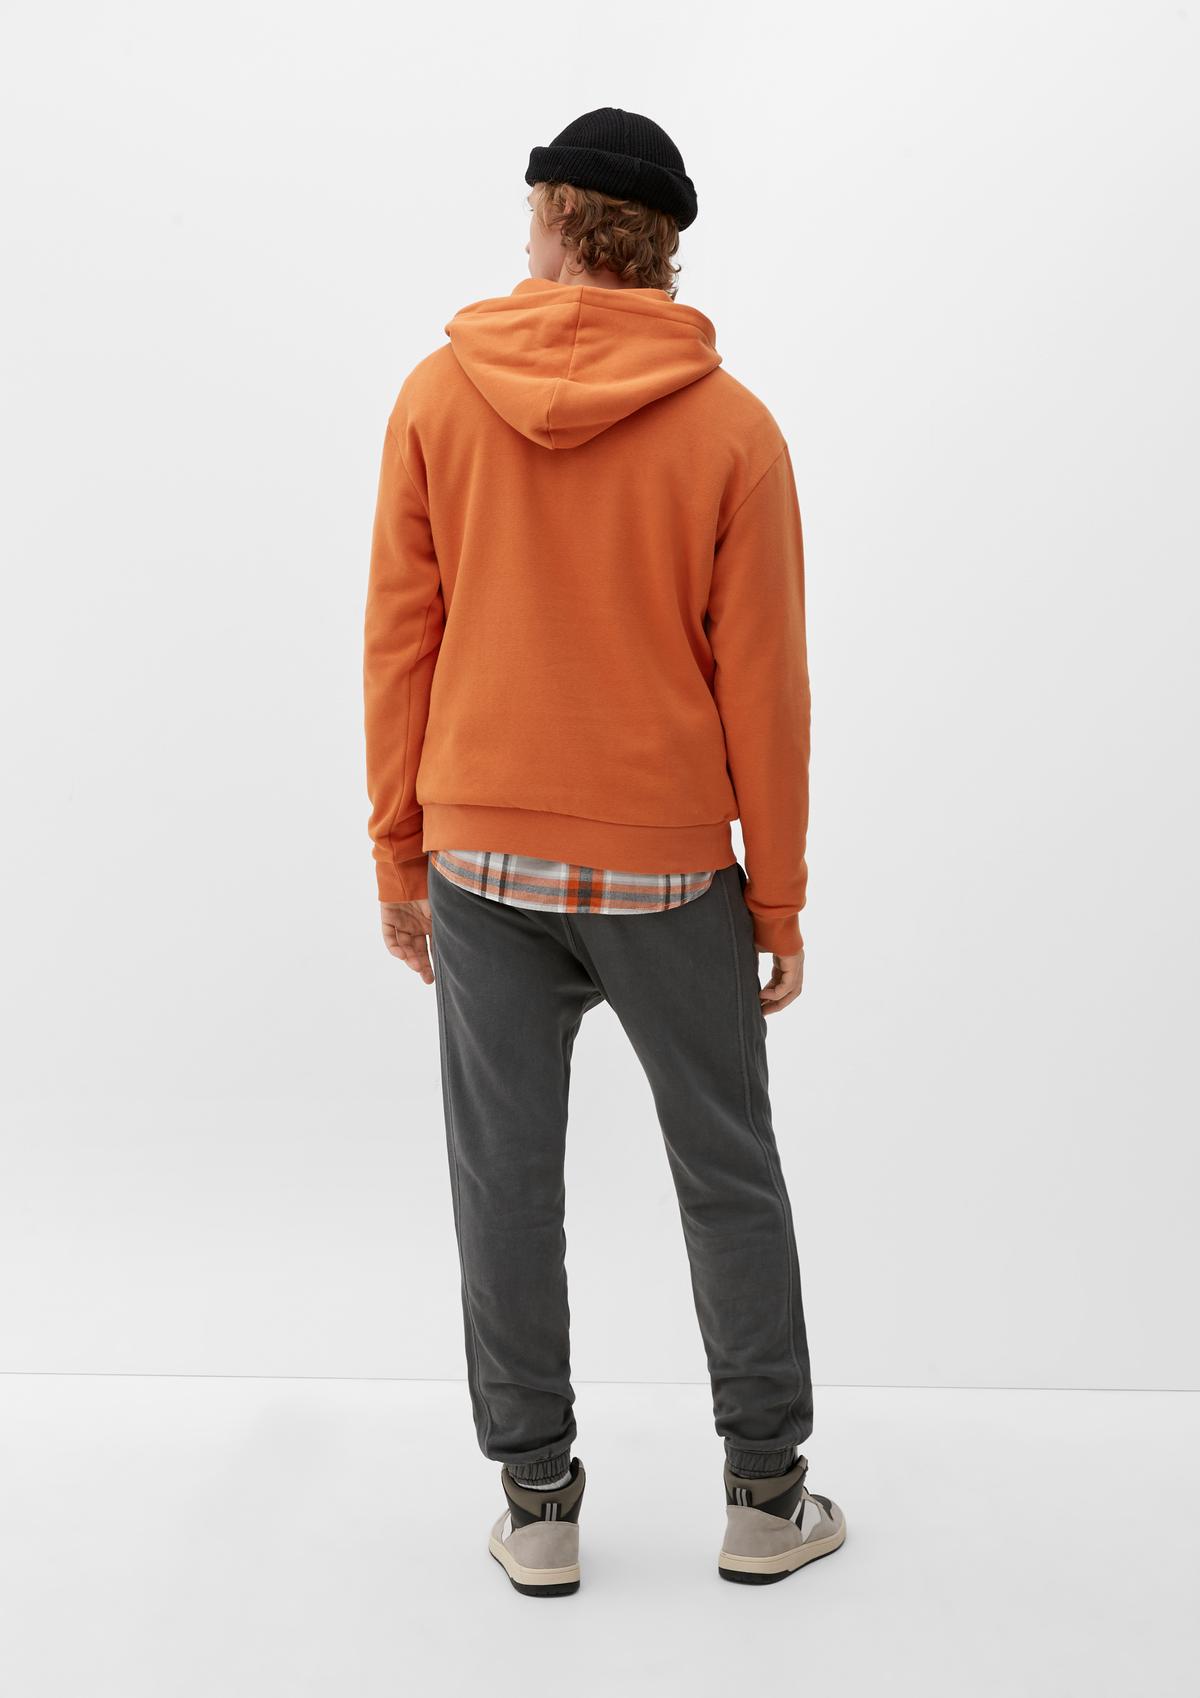 s.Oliver Hooded jumper with a zip